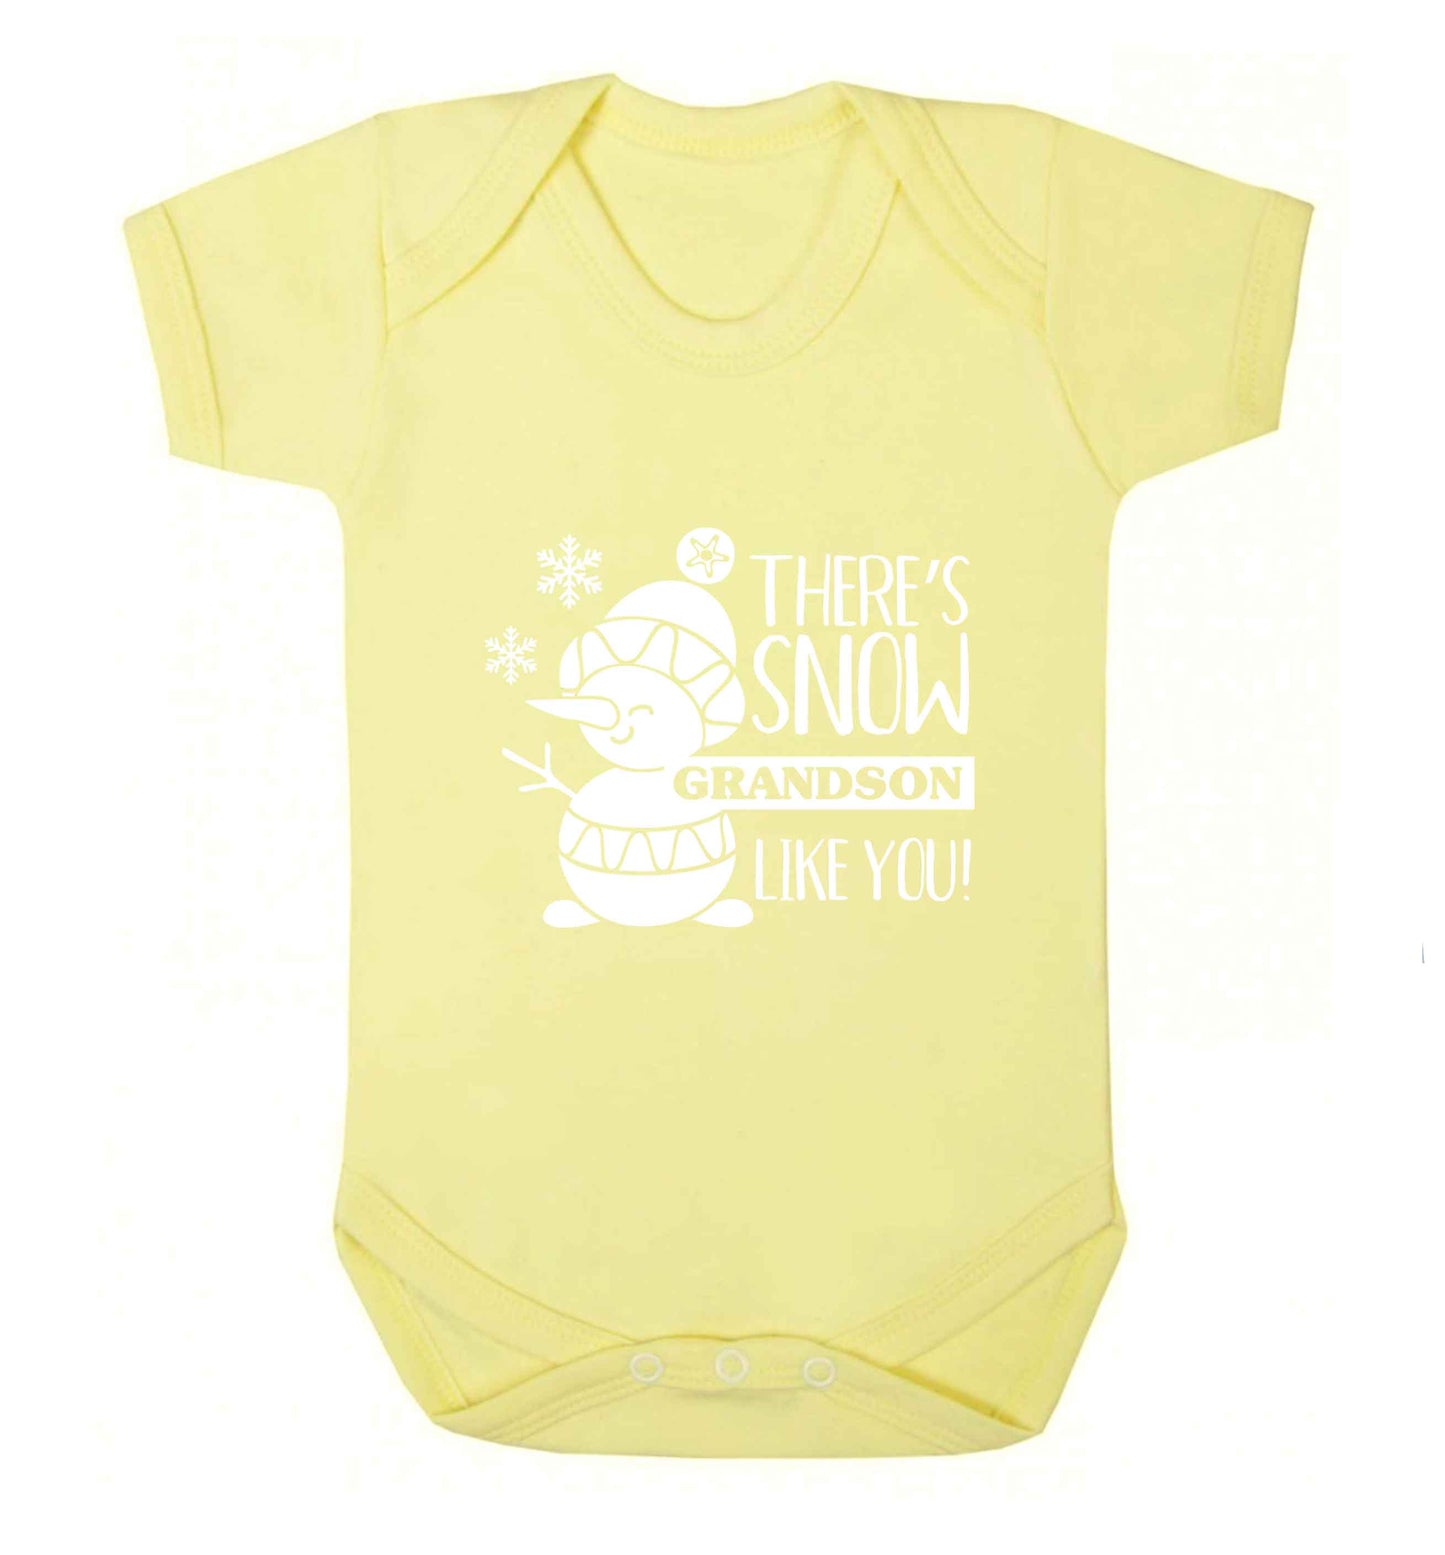 There's snow grandson like you baby vest pale yellow 18-24 months